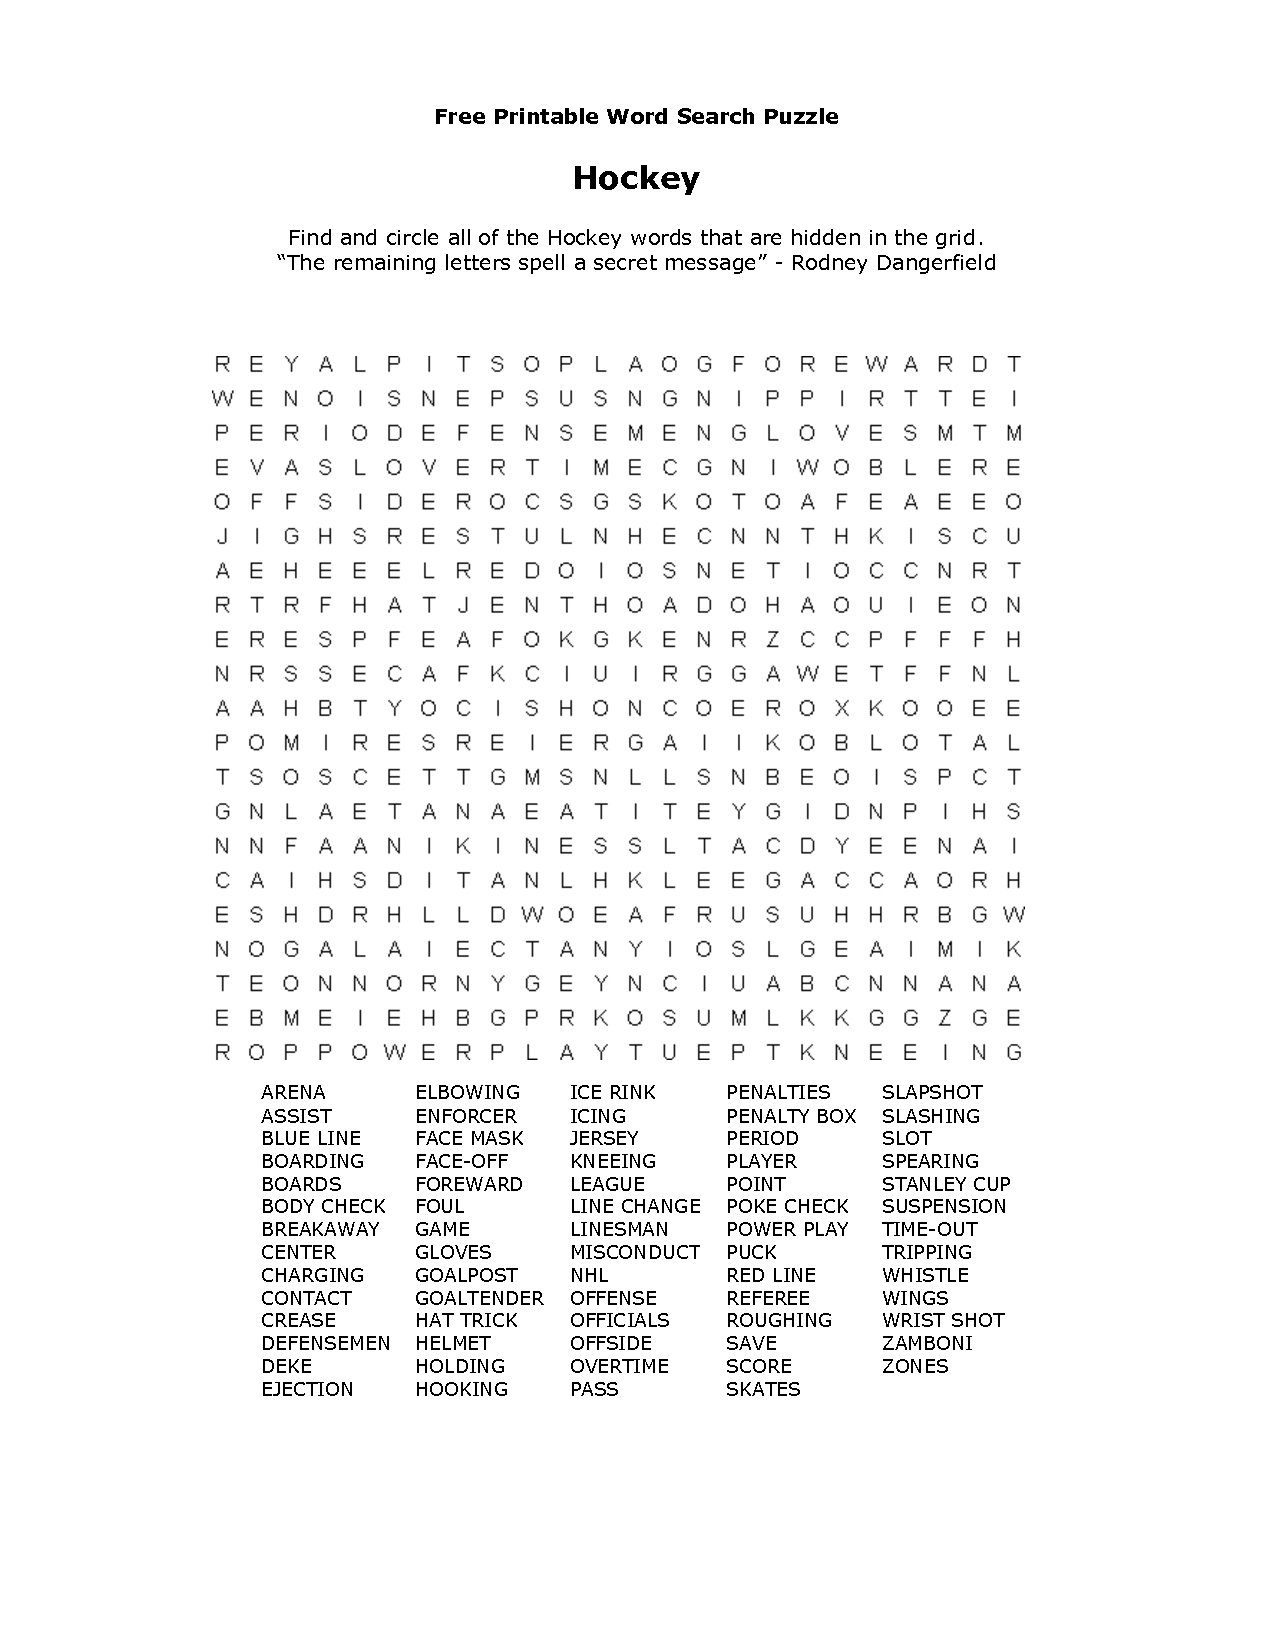 Free Printable Word Searches | Kiddo Shelter - Free Printable Puzzle Worksheets